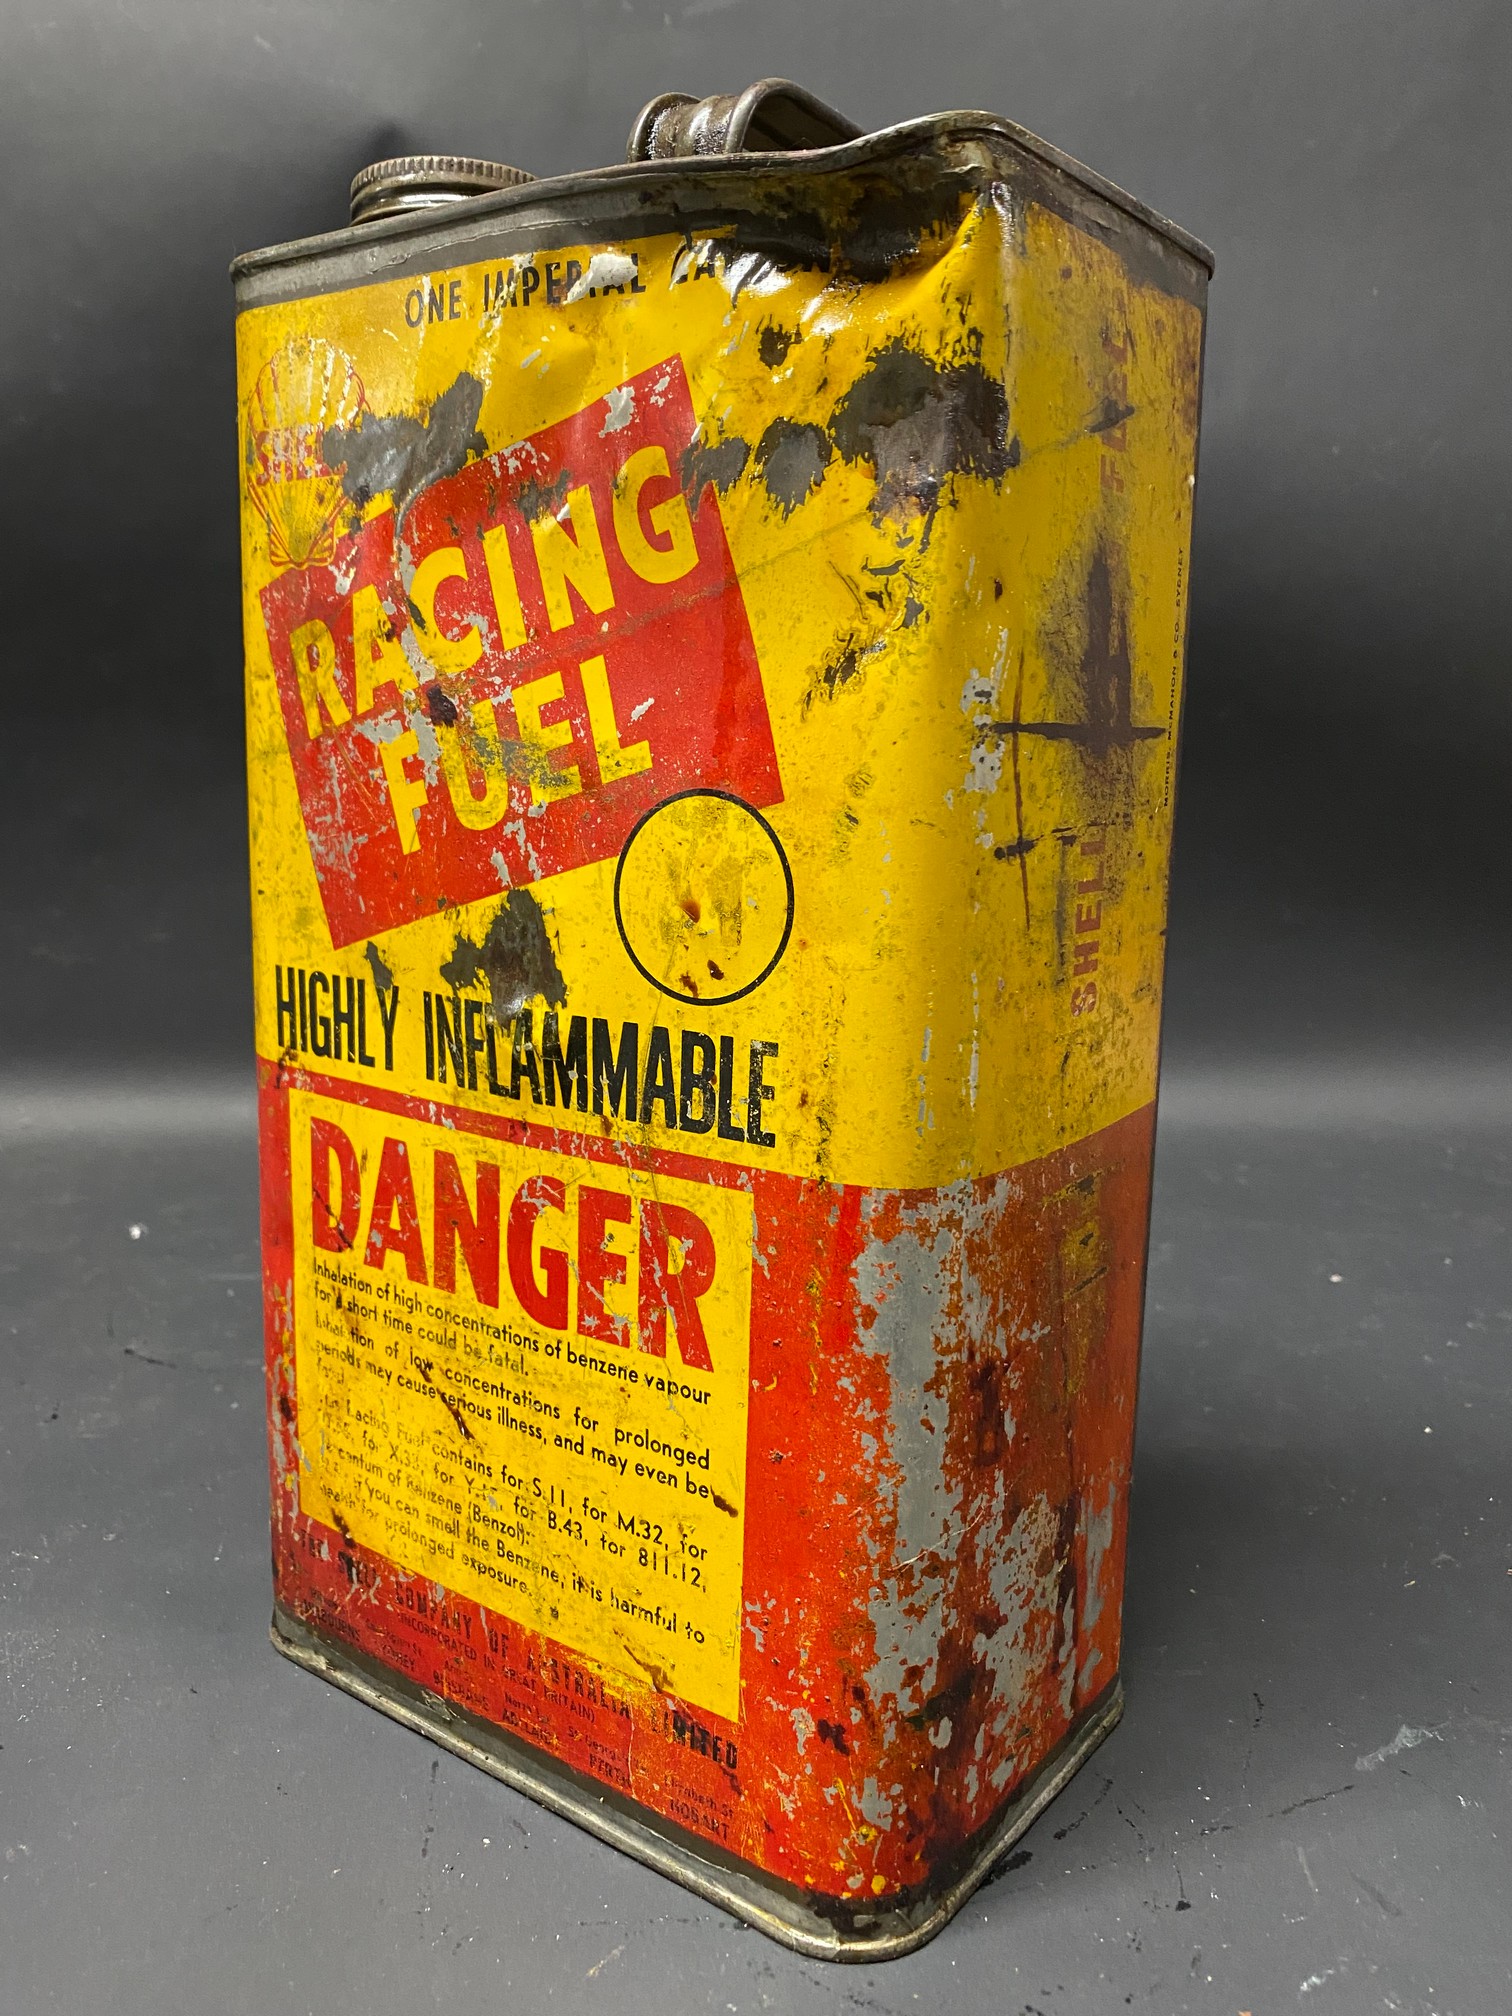 A Shell Racing Fuel gallon can. - Image 2 of 4